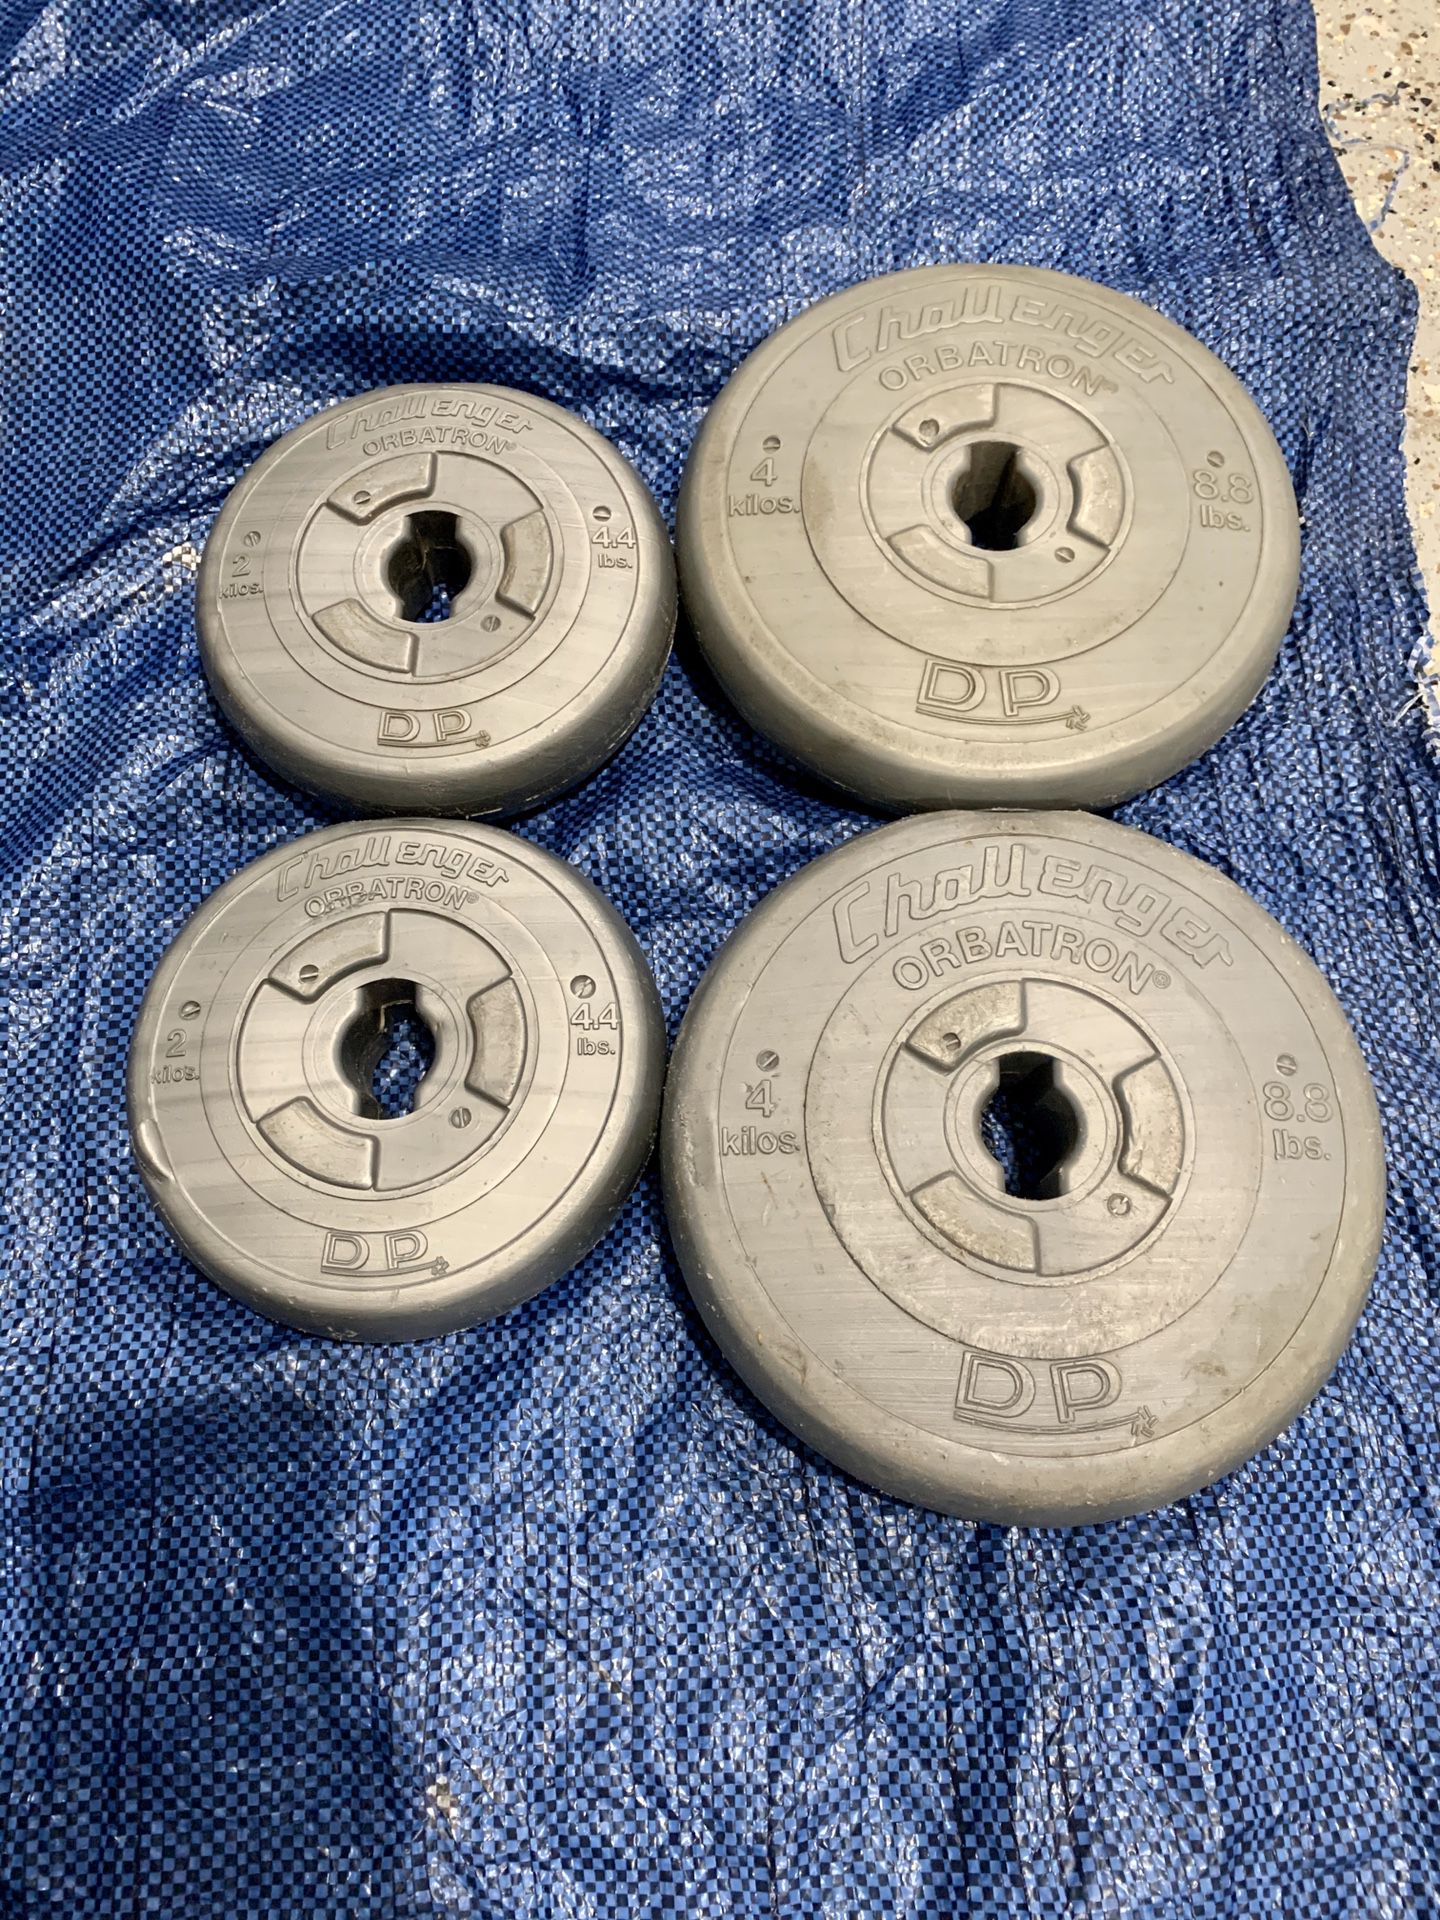 1 inch weight plates for dumbbells, bars and machines